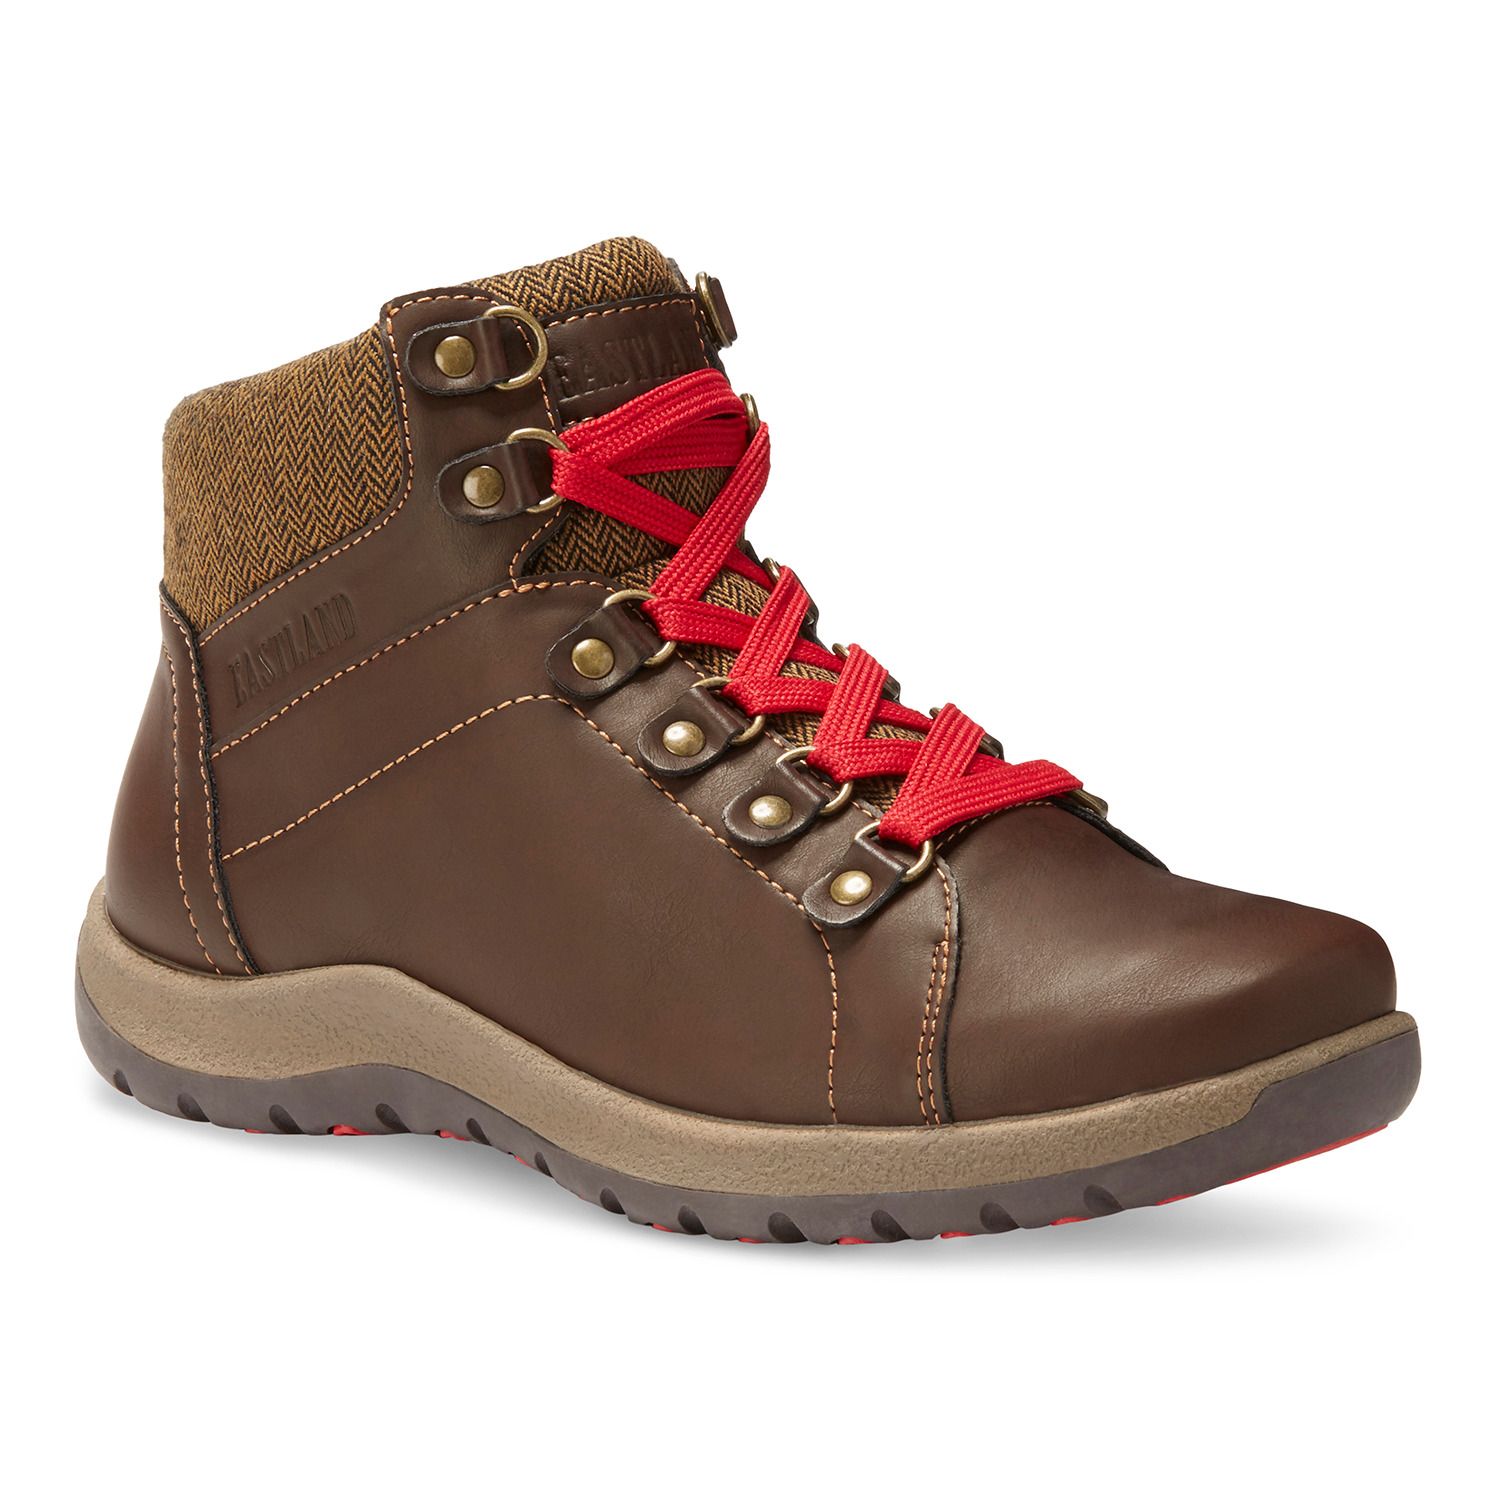 Image for Eastland Bethanie Women's Alpine Boots at Kohl's.